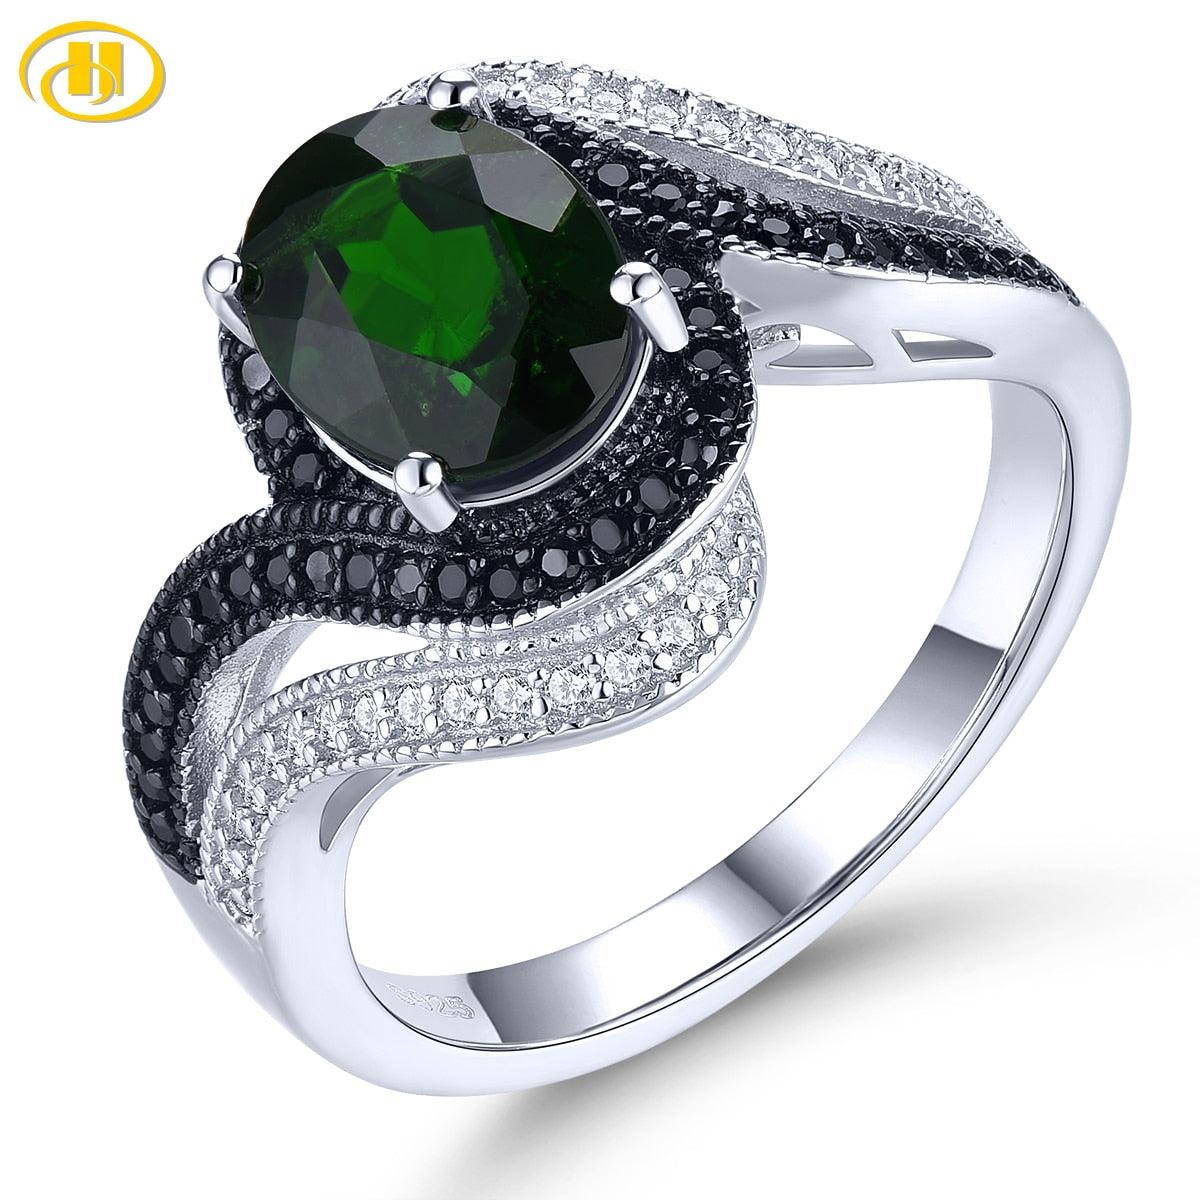 Natural Chrome Diopside Spinel Silver Rings 2.5 Carats Genuine Gemstone Special Design Women Casual Jewelrys Style Top Quality